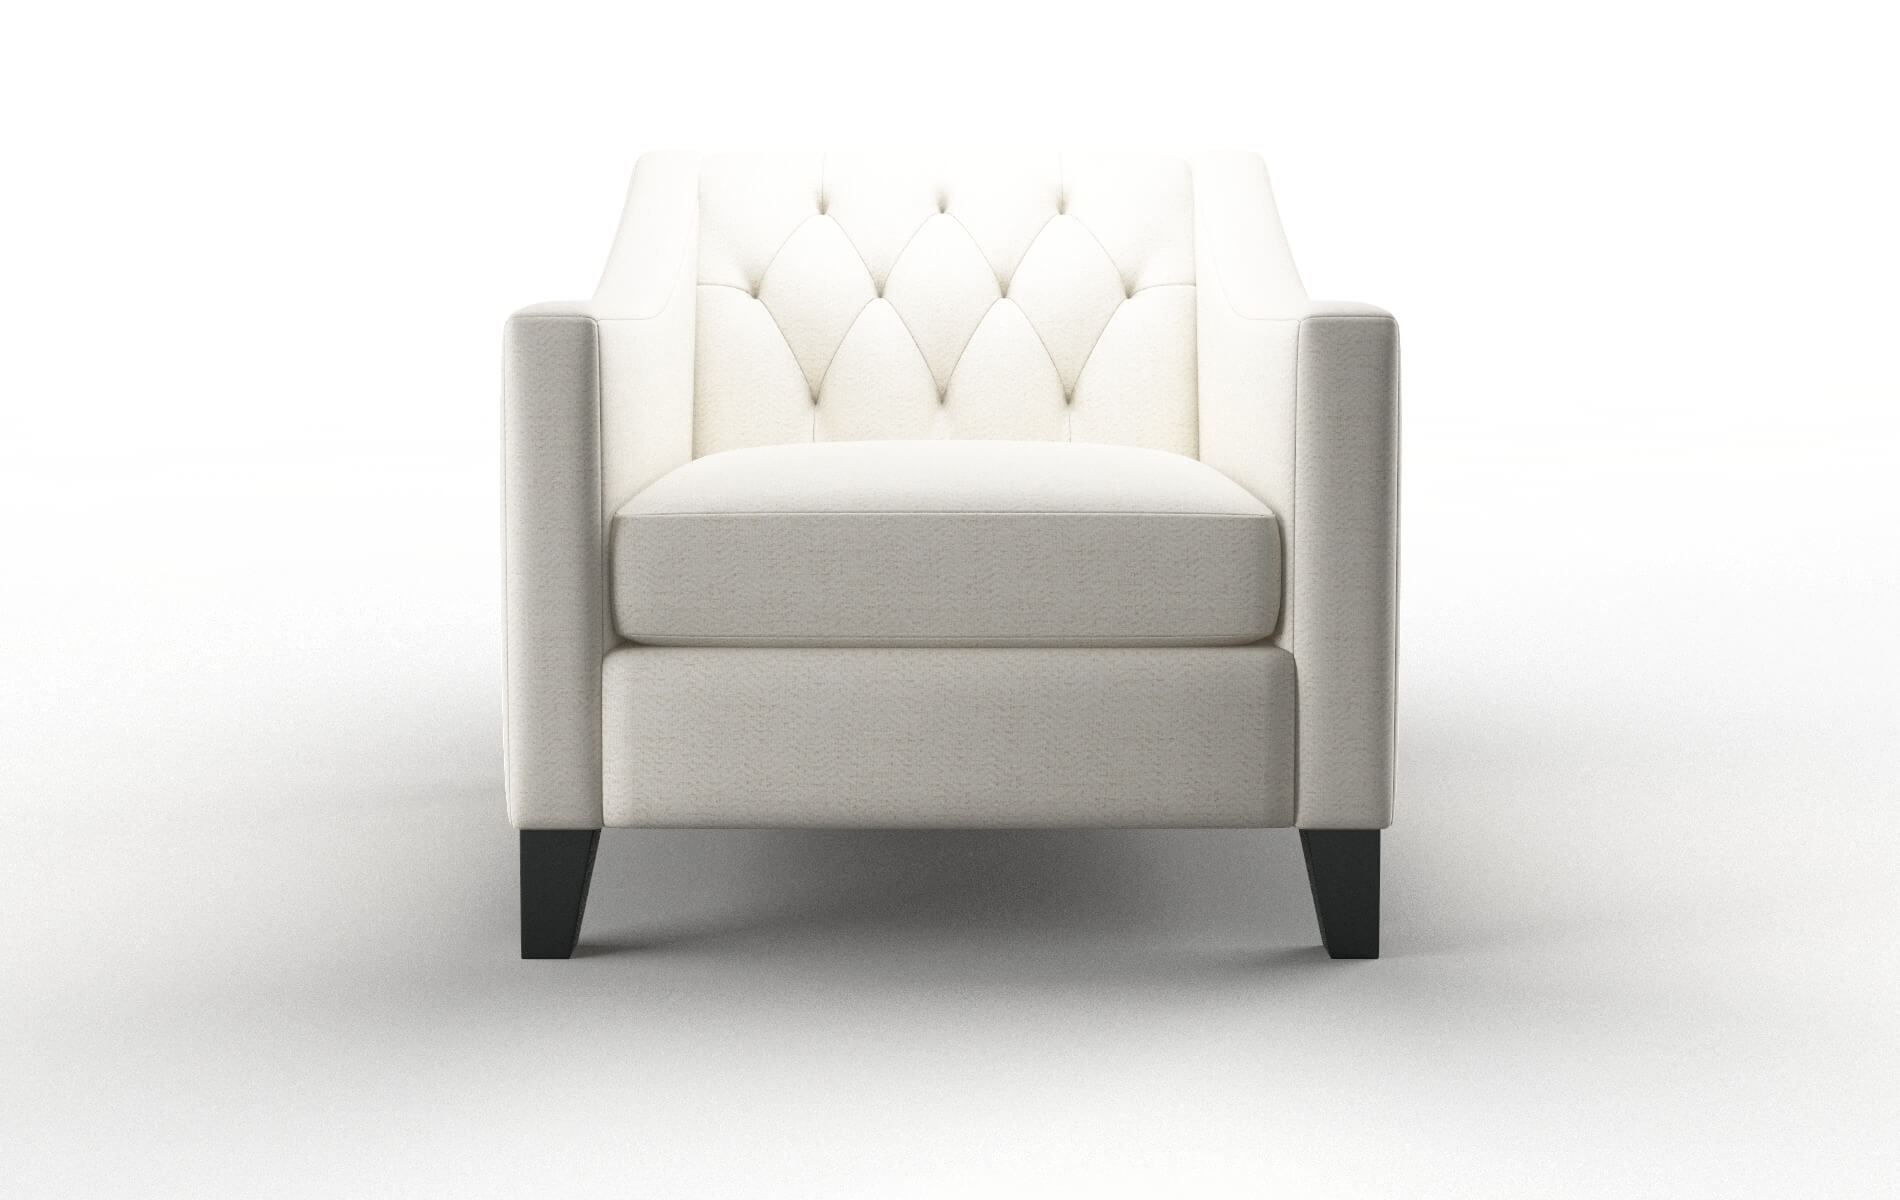 Seville Catalina Ivory chair espresso legs